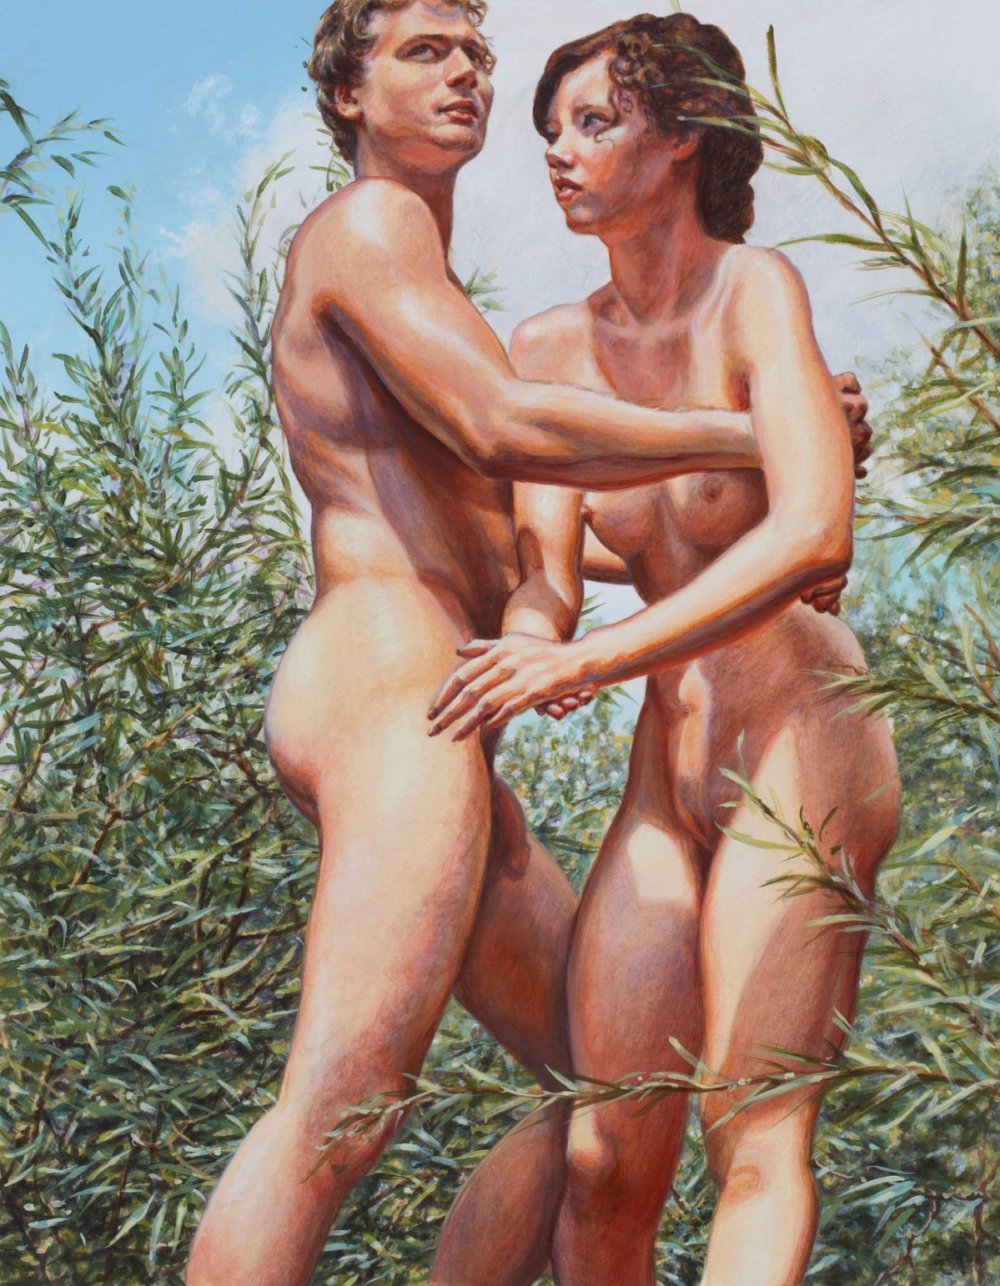 Human Nudity In Its Purest Form In Susannah Martins Paintings 6